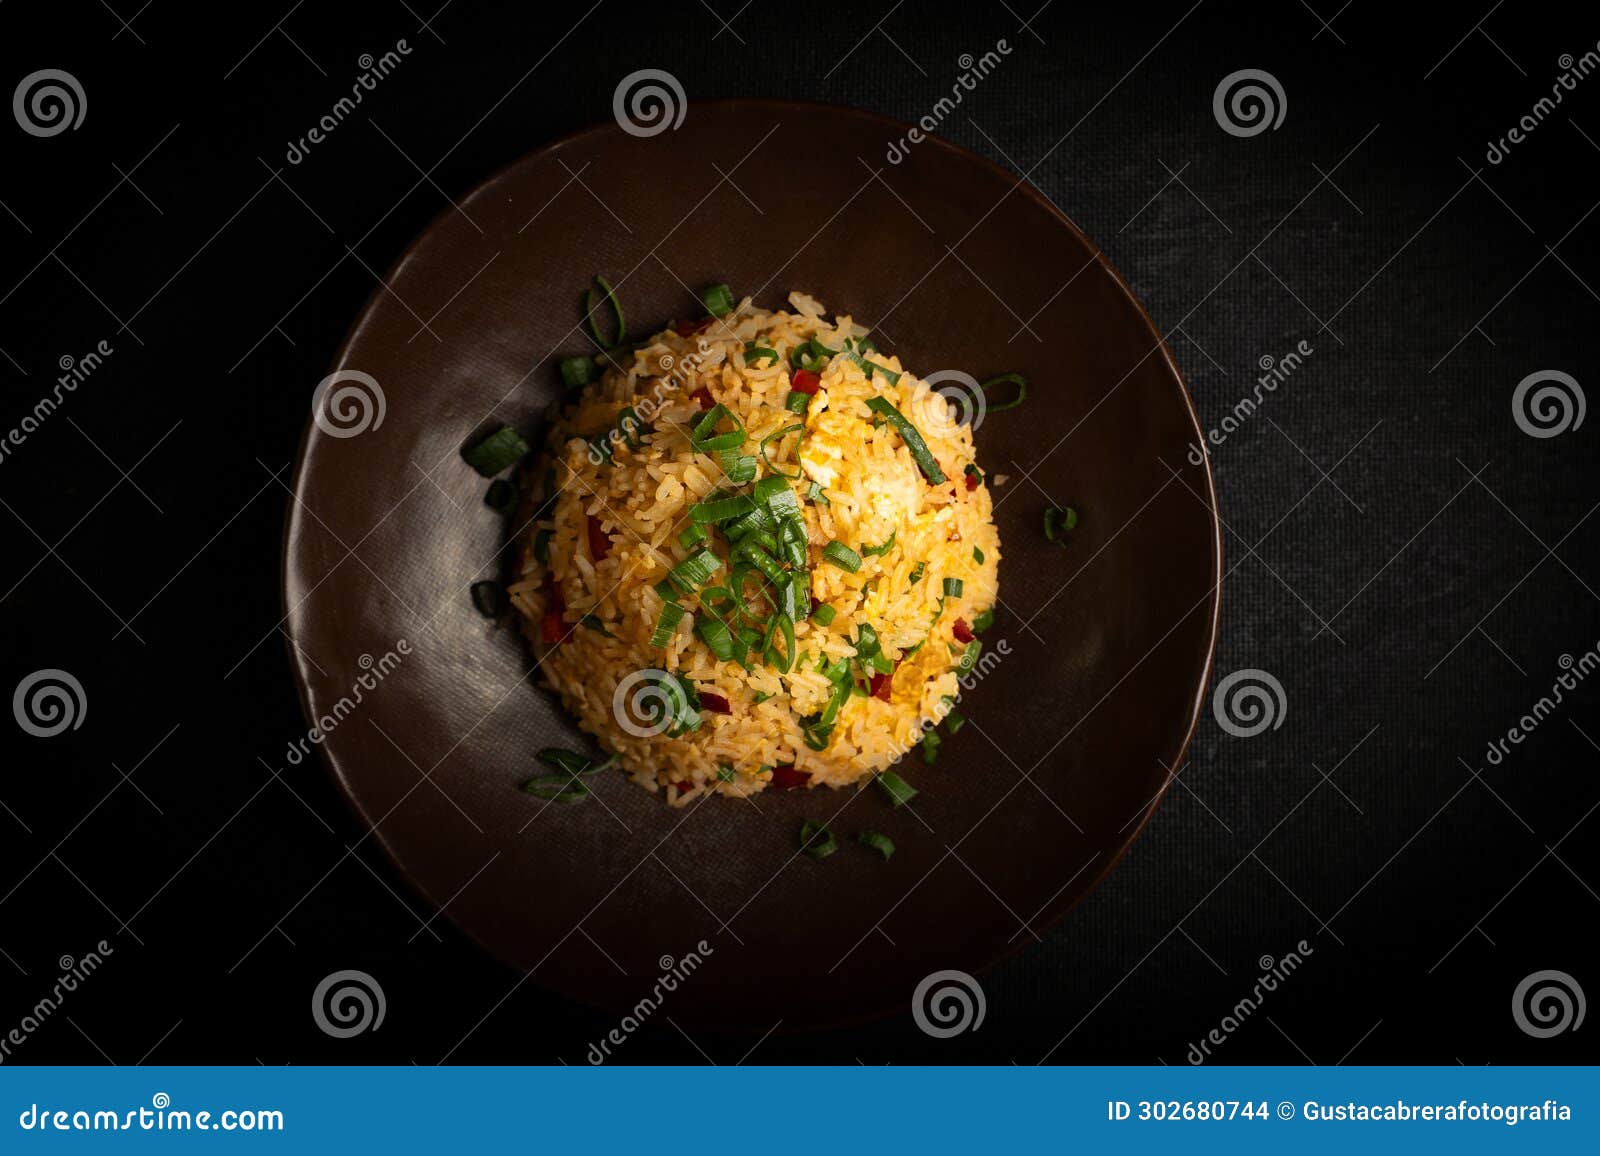 seen from above, a peruvian dish resulting from the fusion with asian food.